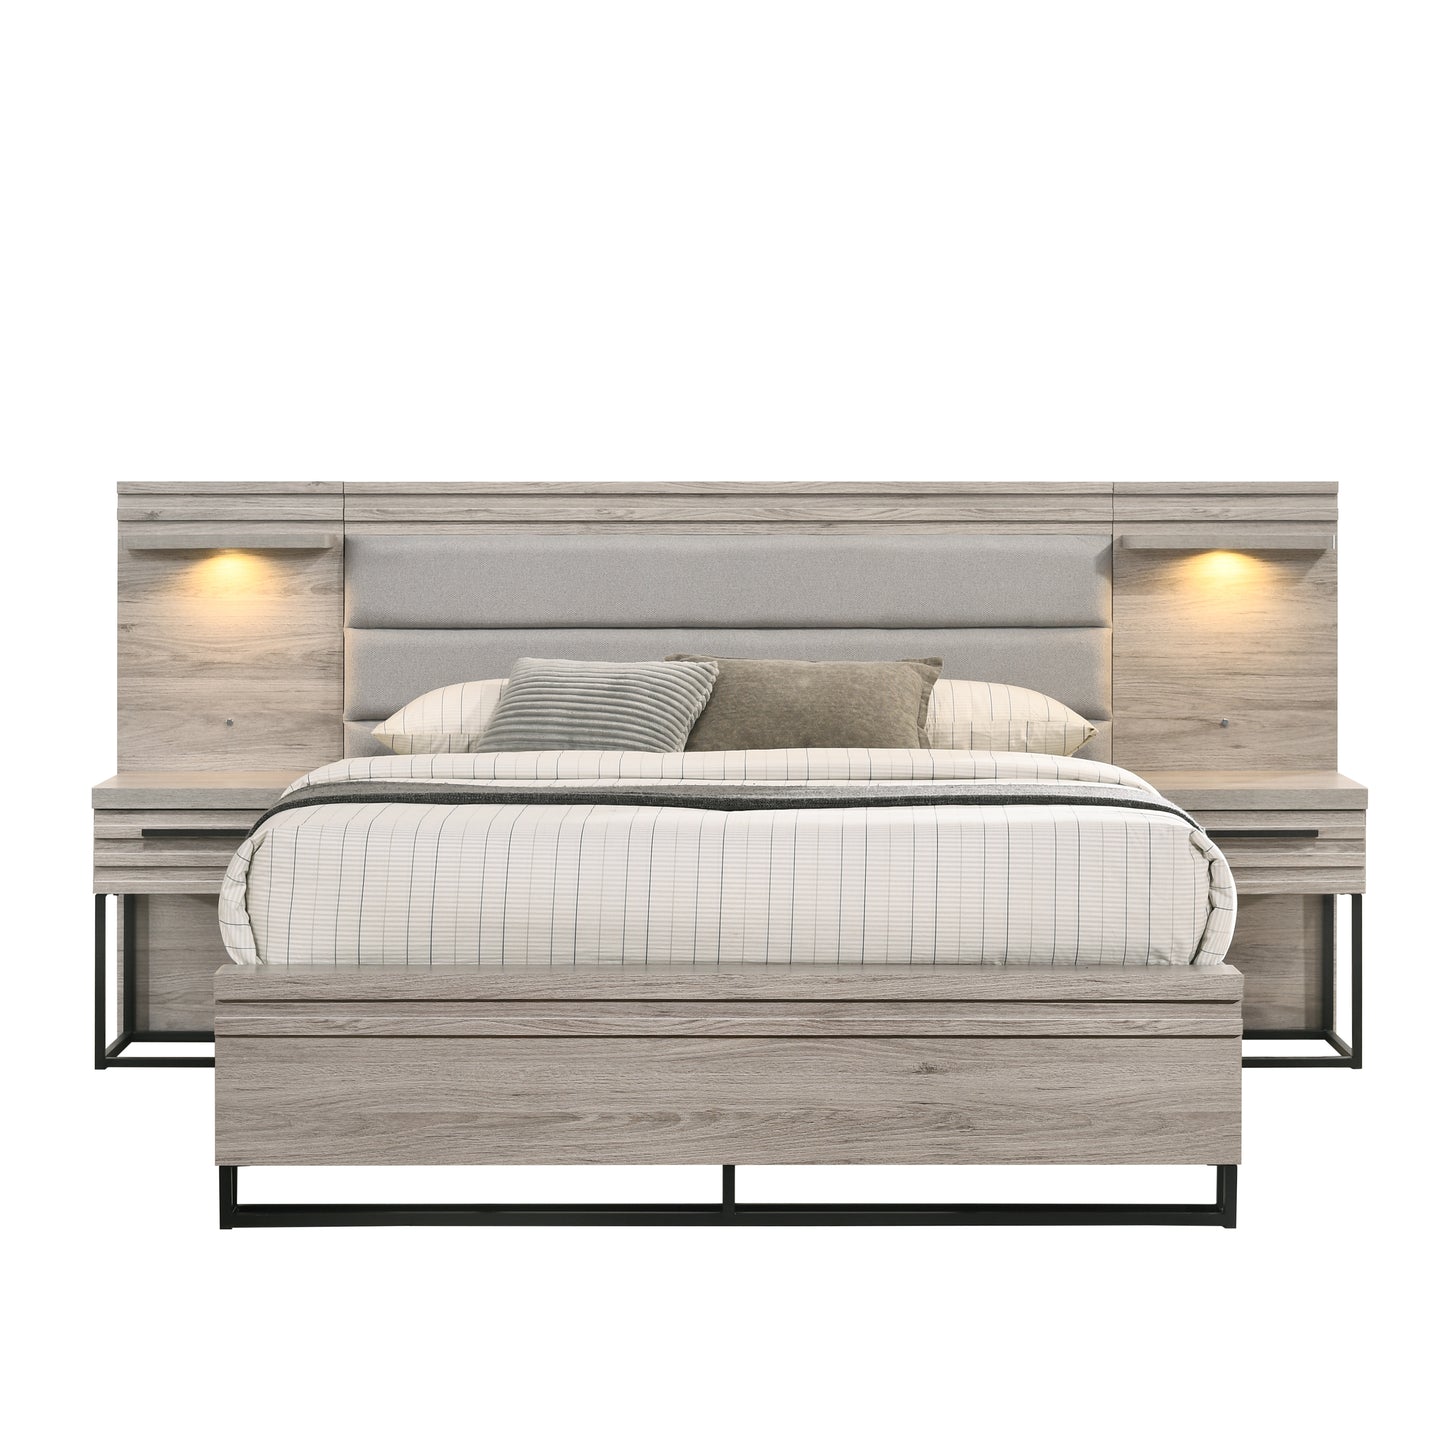 Alvear Upholstered Wood Wallbed Bed with White LED Lights, 2 Nightstands, Weathered Gray